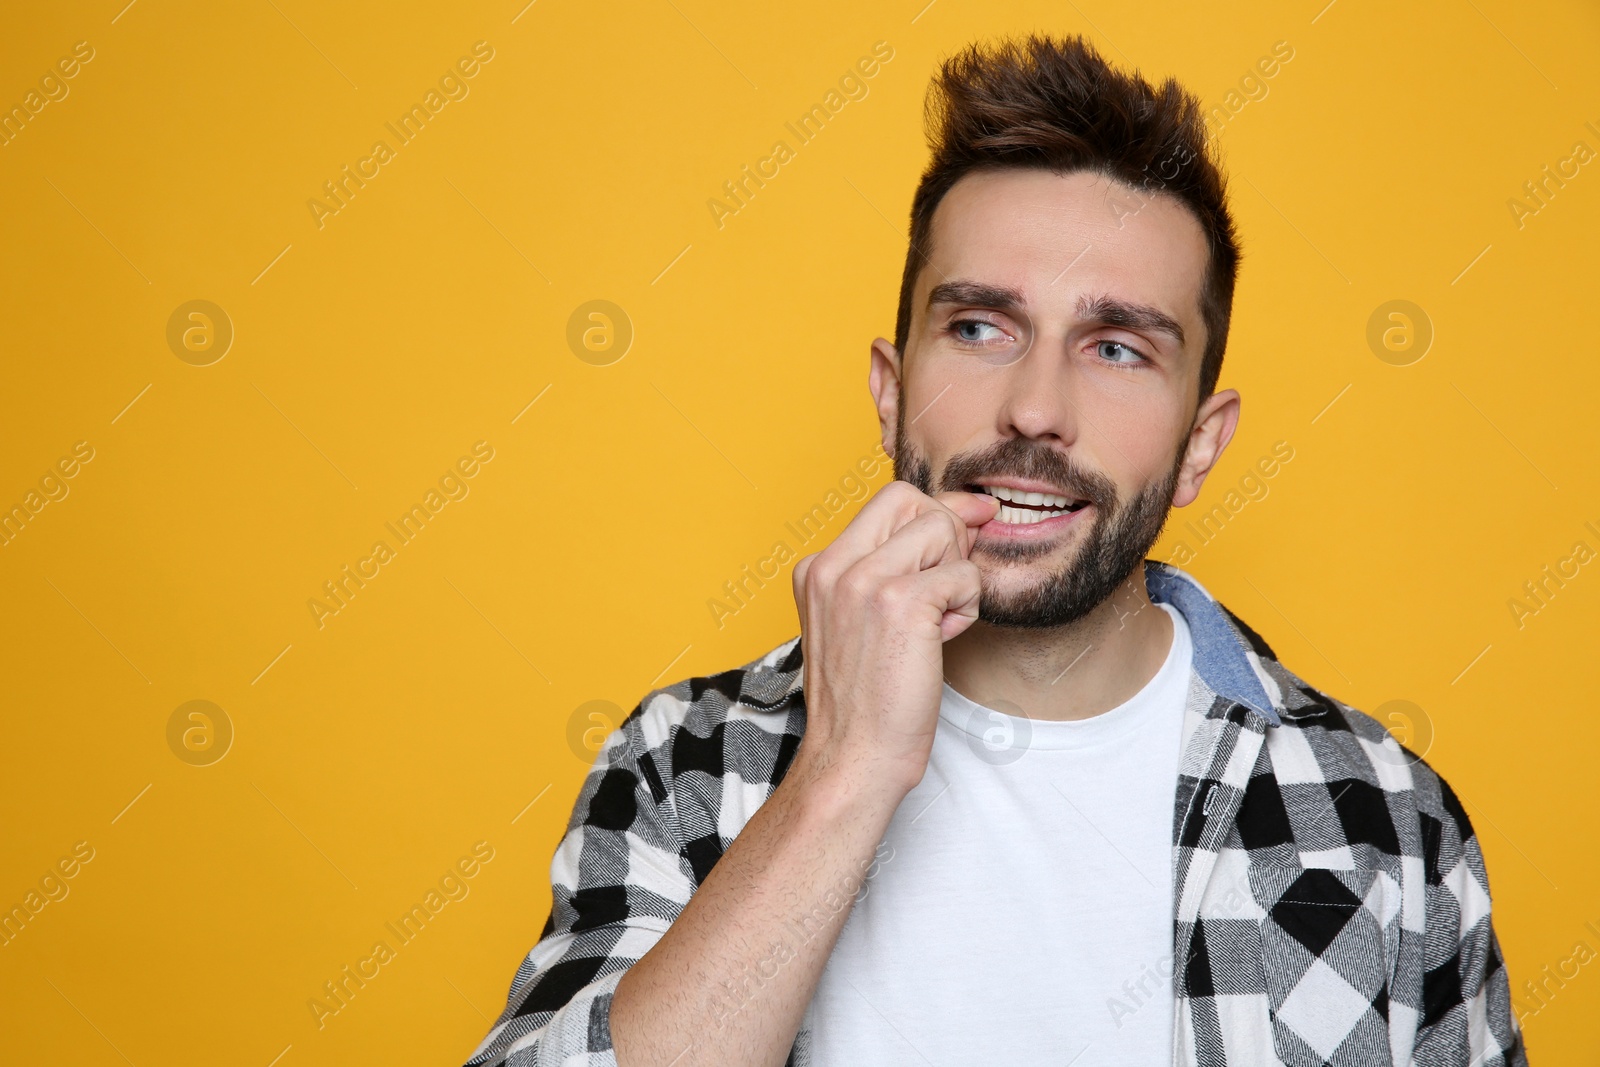 Photo of Man biting his nails on yellow background. Space for text